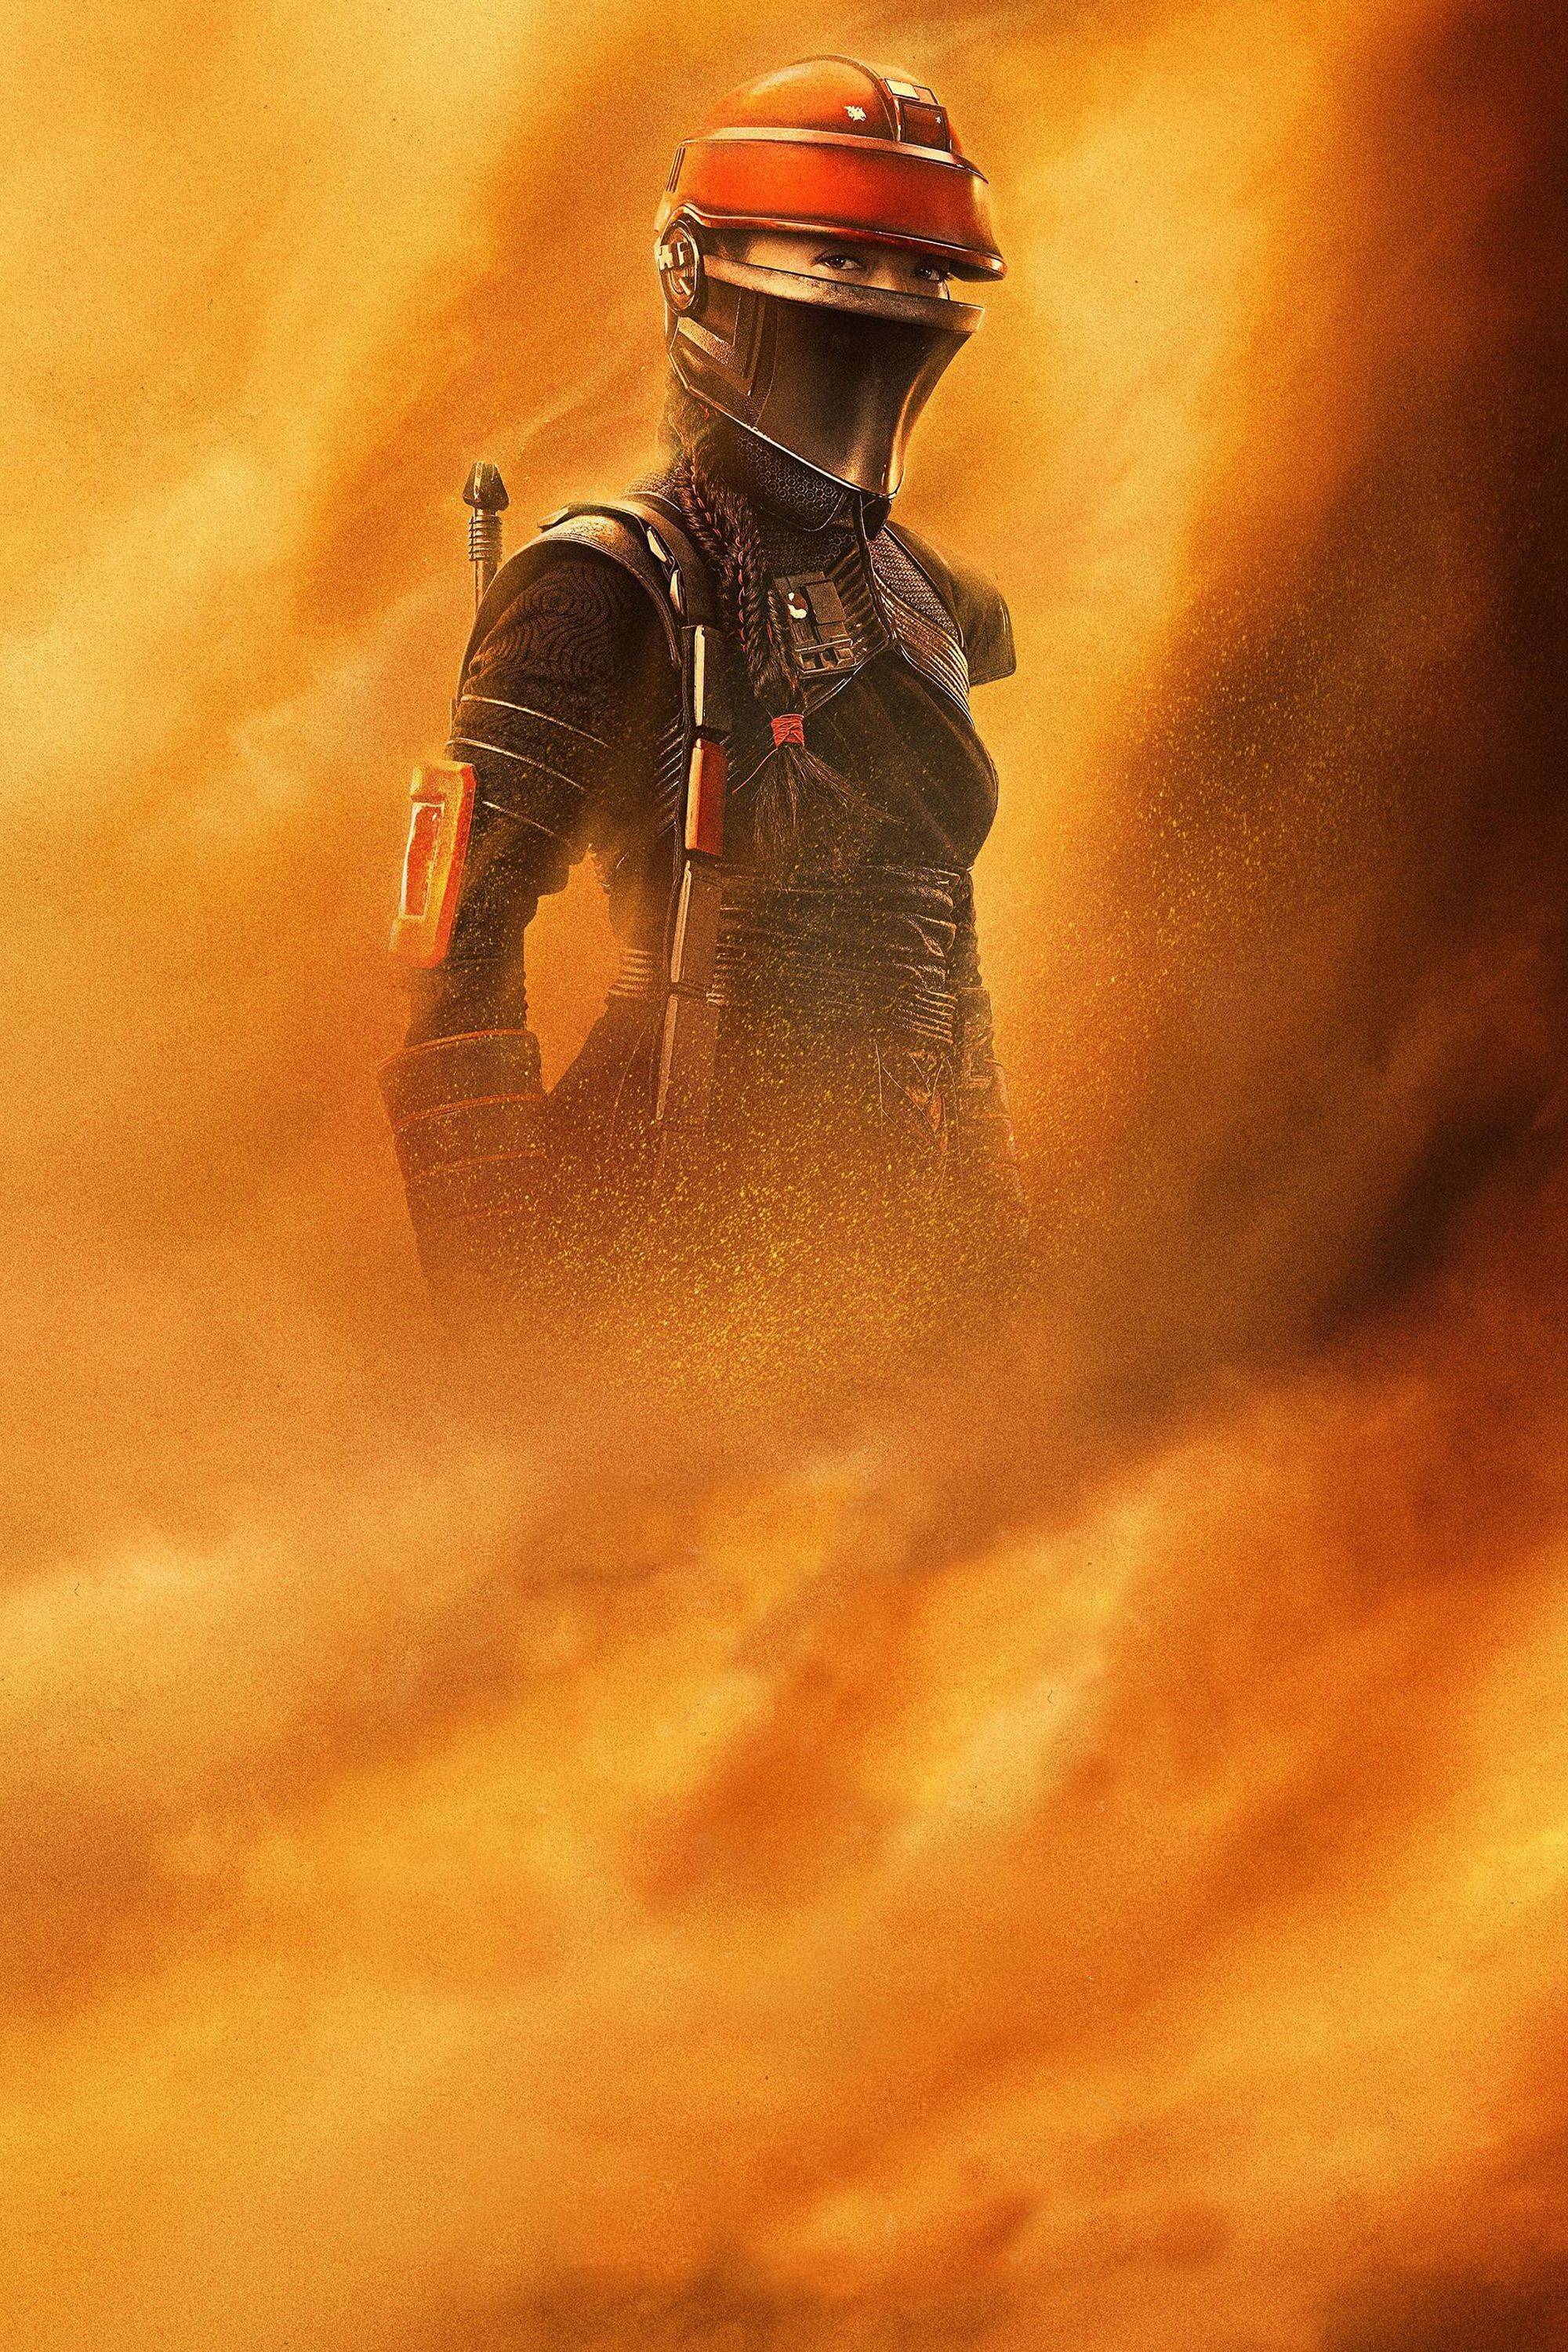 Ming-Na Wen as Fennec Shand in The Book of Boba Fett Poster